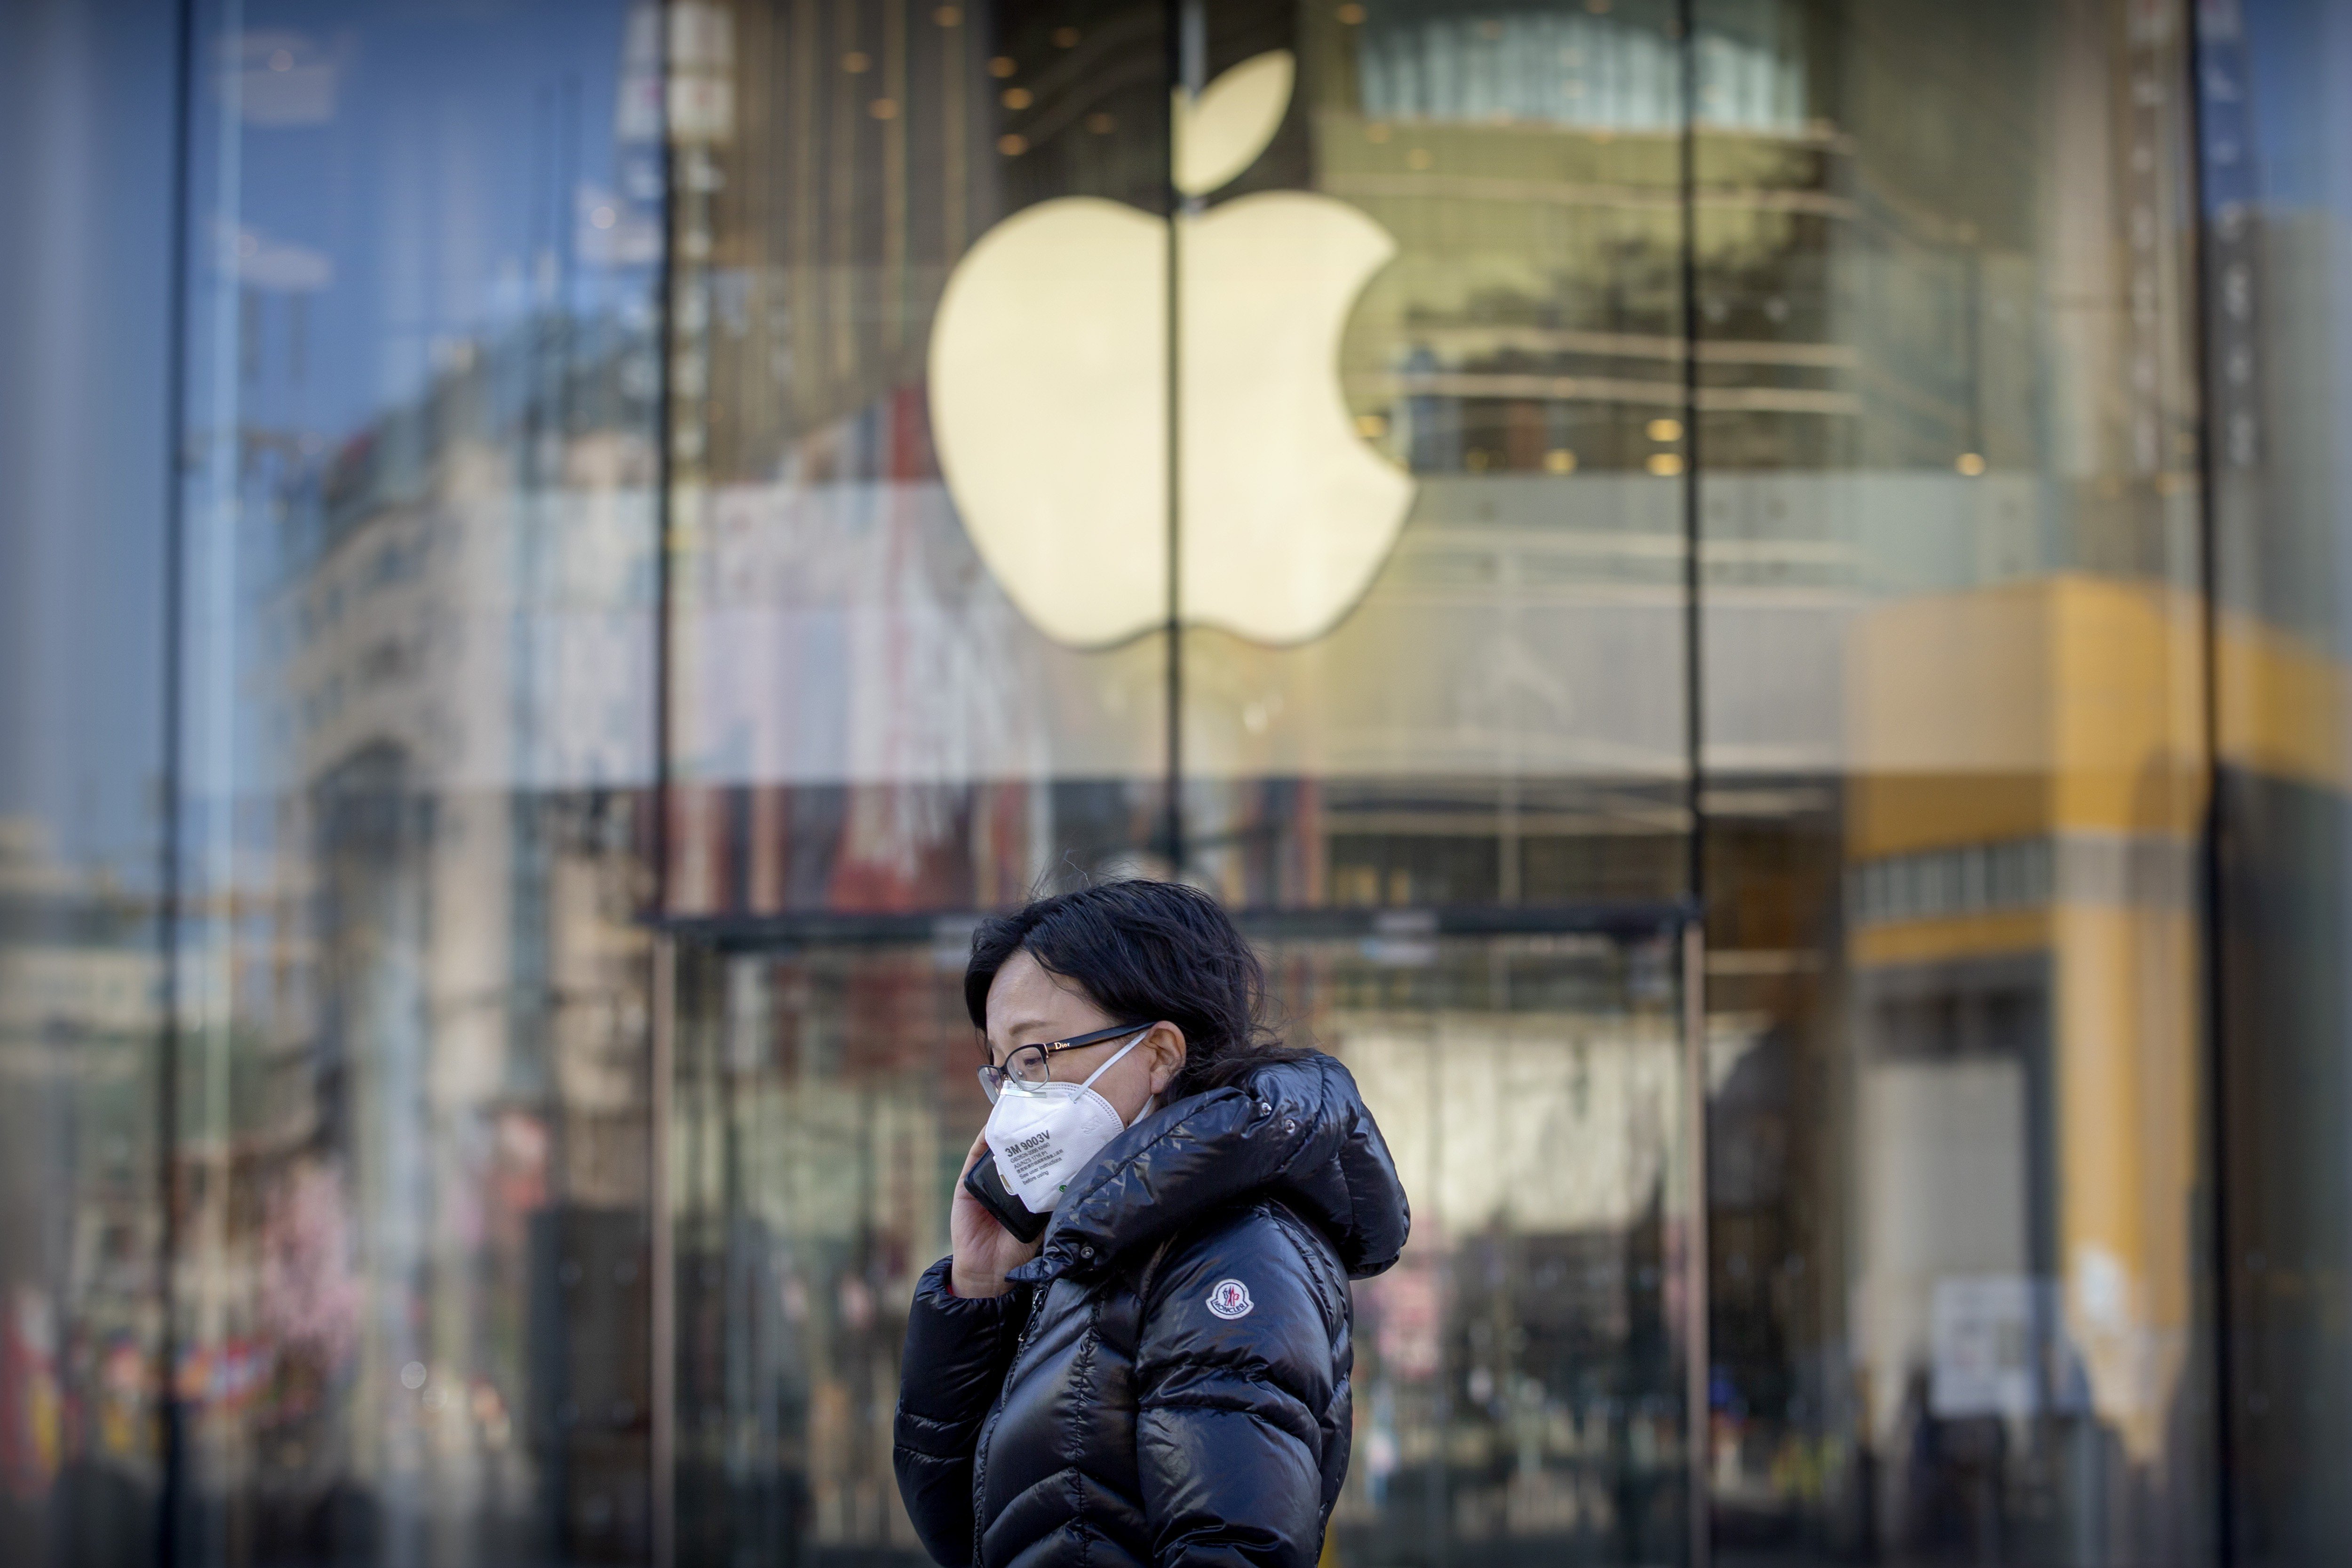 A woman wearing a mask walks past a temporarily closed Apple store in Beijing on February 4. The American tech giant has closed all stores in China due to the coronavirus outbreak. Photo: AP